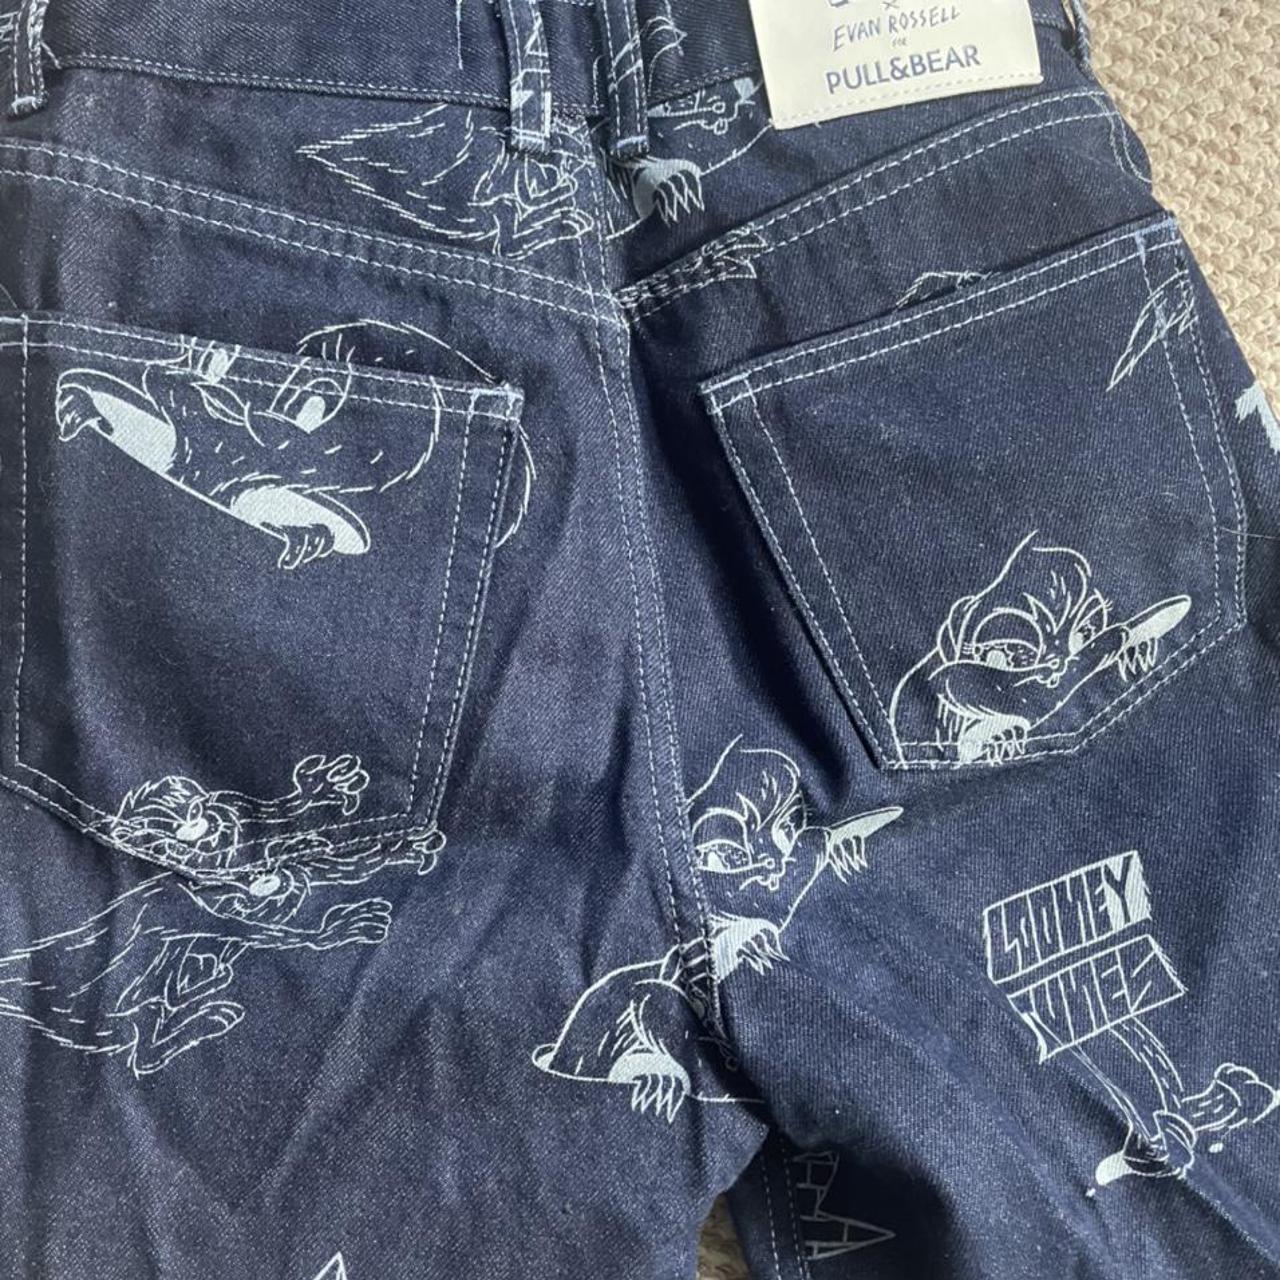 Pull & bear jeans Looney tunes Like new only worn... - Depop